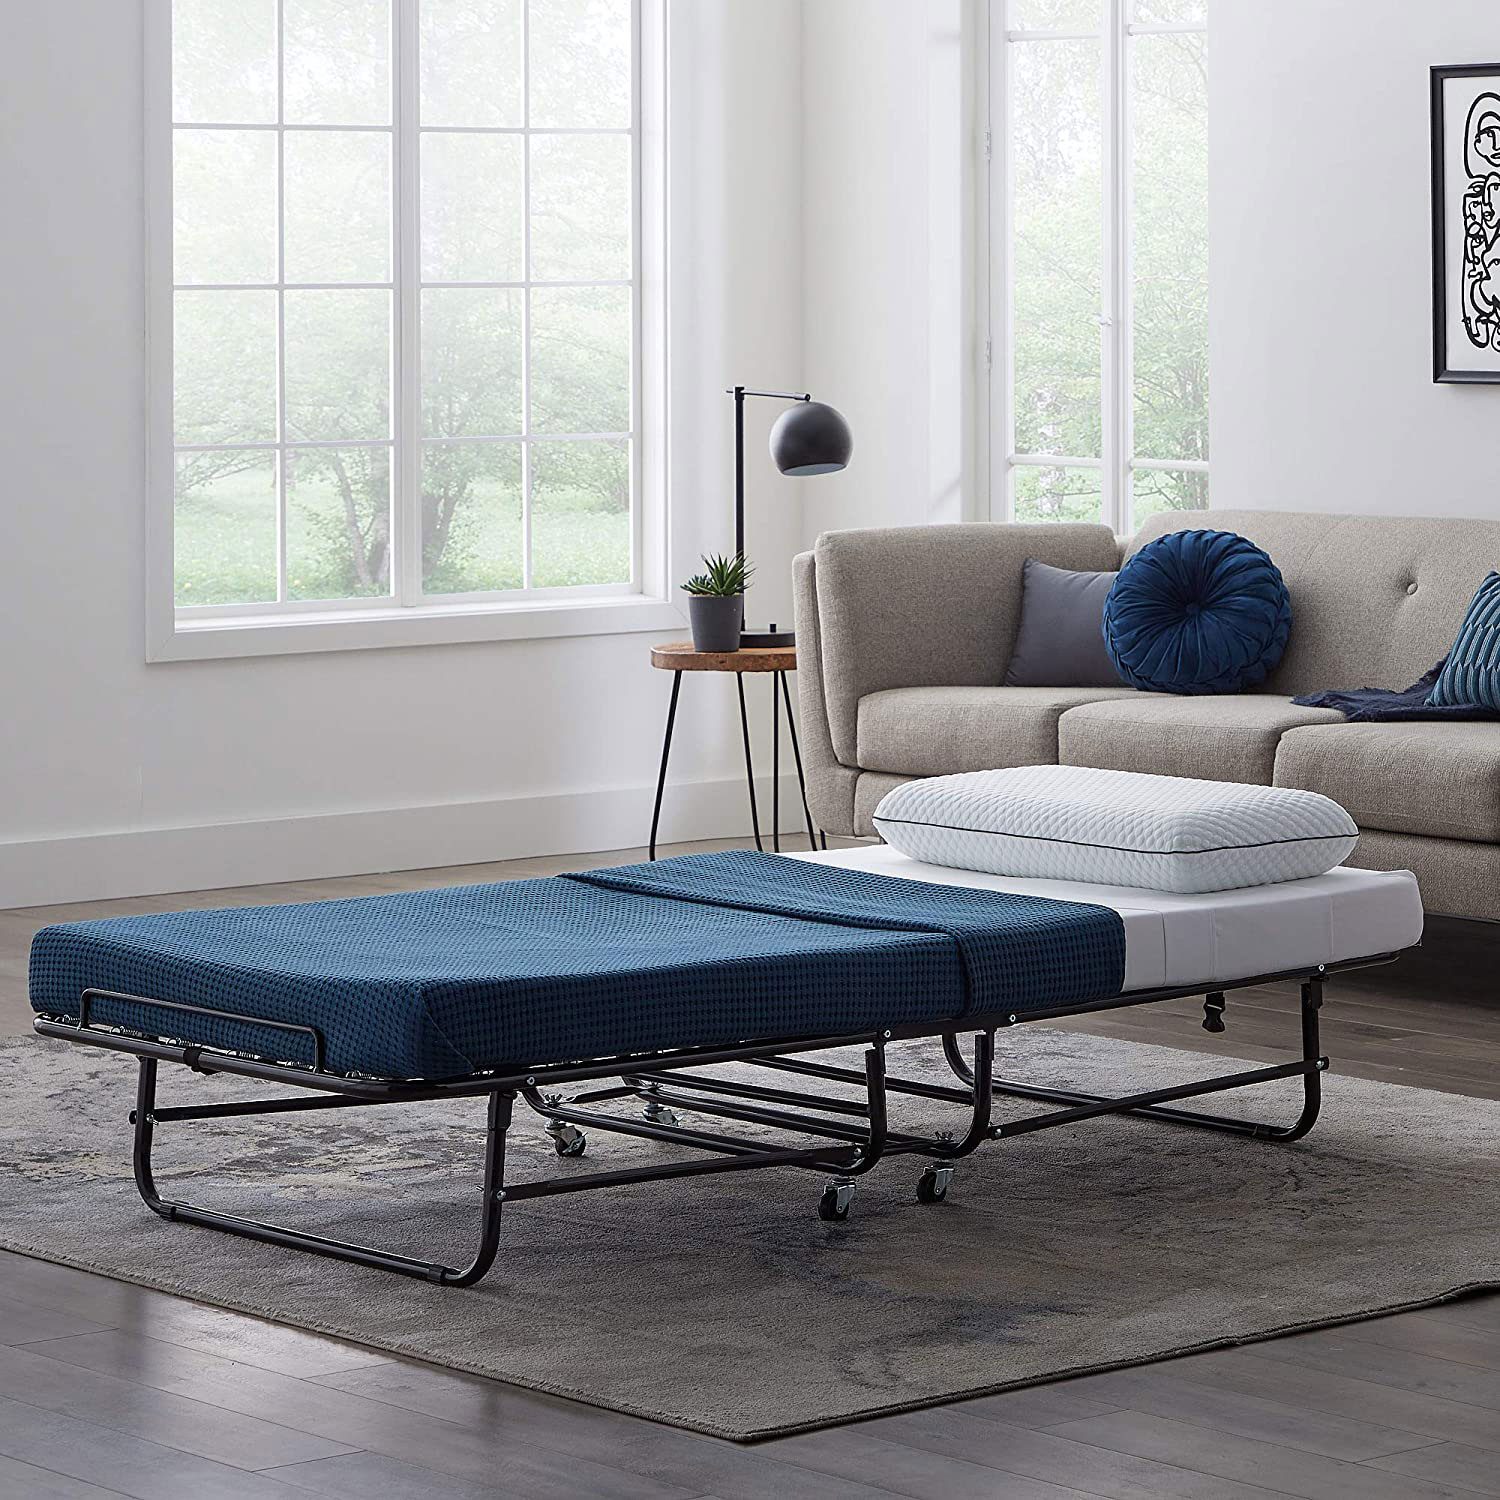 7 Best Rollaway Beds for Small Spaces in 2023